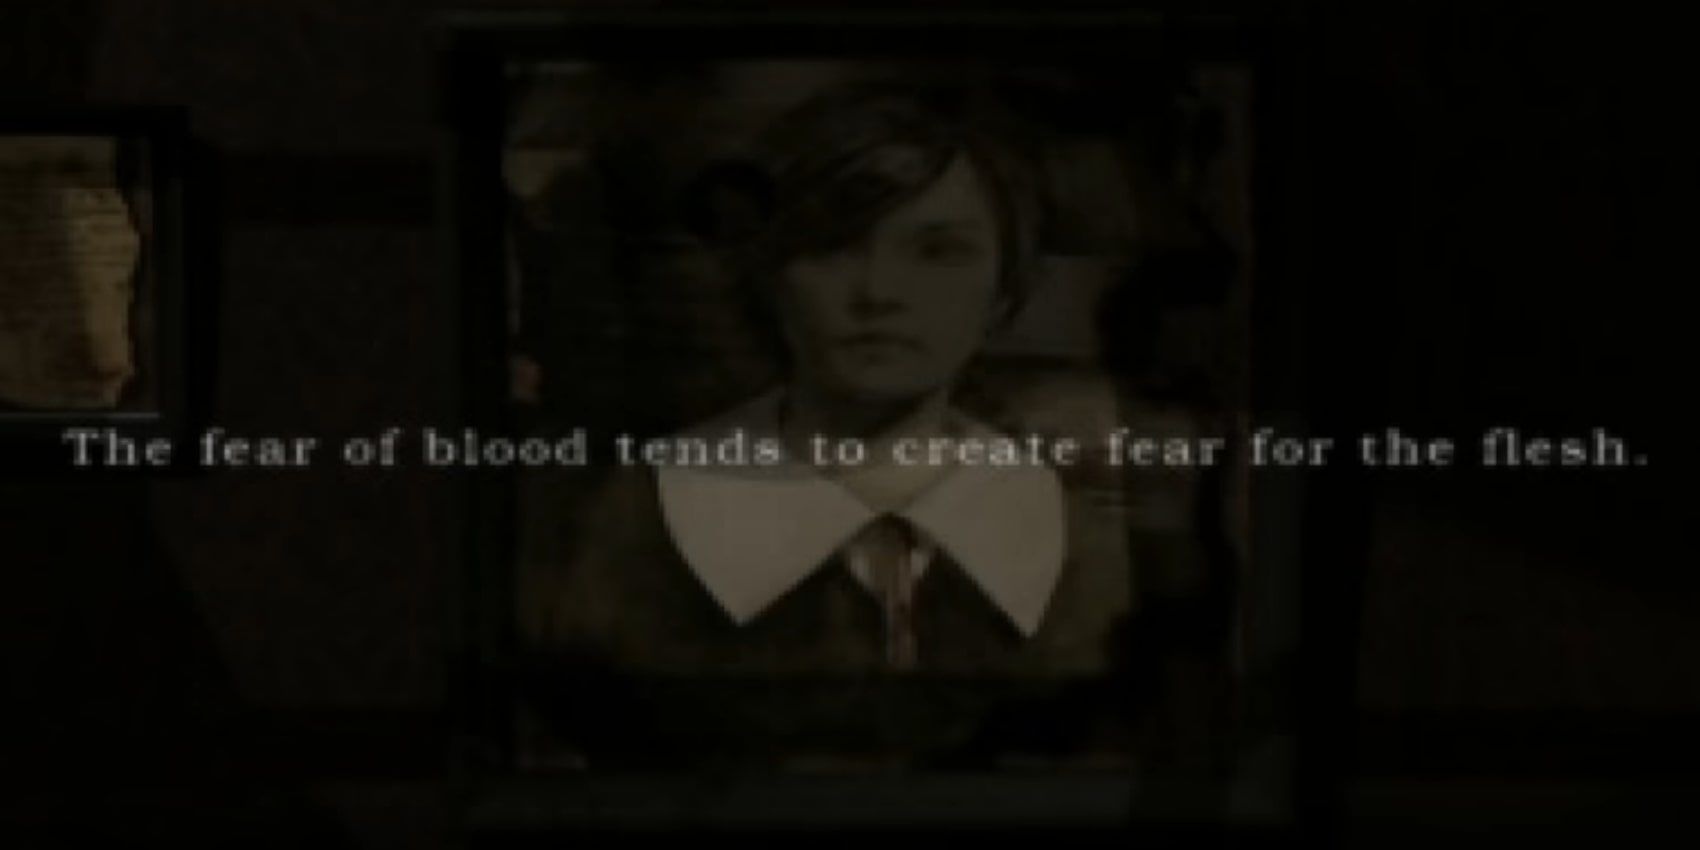 'The fear of blood tends to create fear for the flesh' quote over a photo of Alessa Gillespie in Silent Hill. 